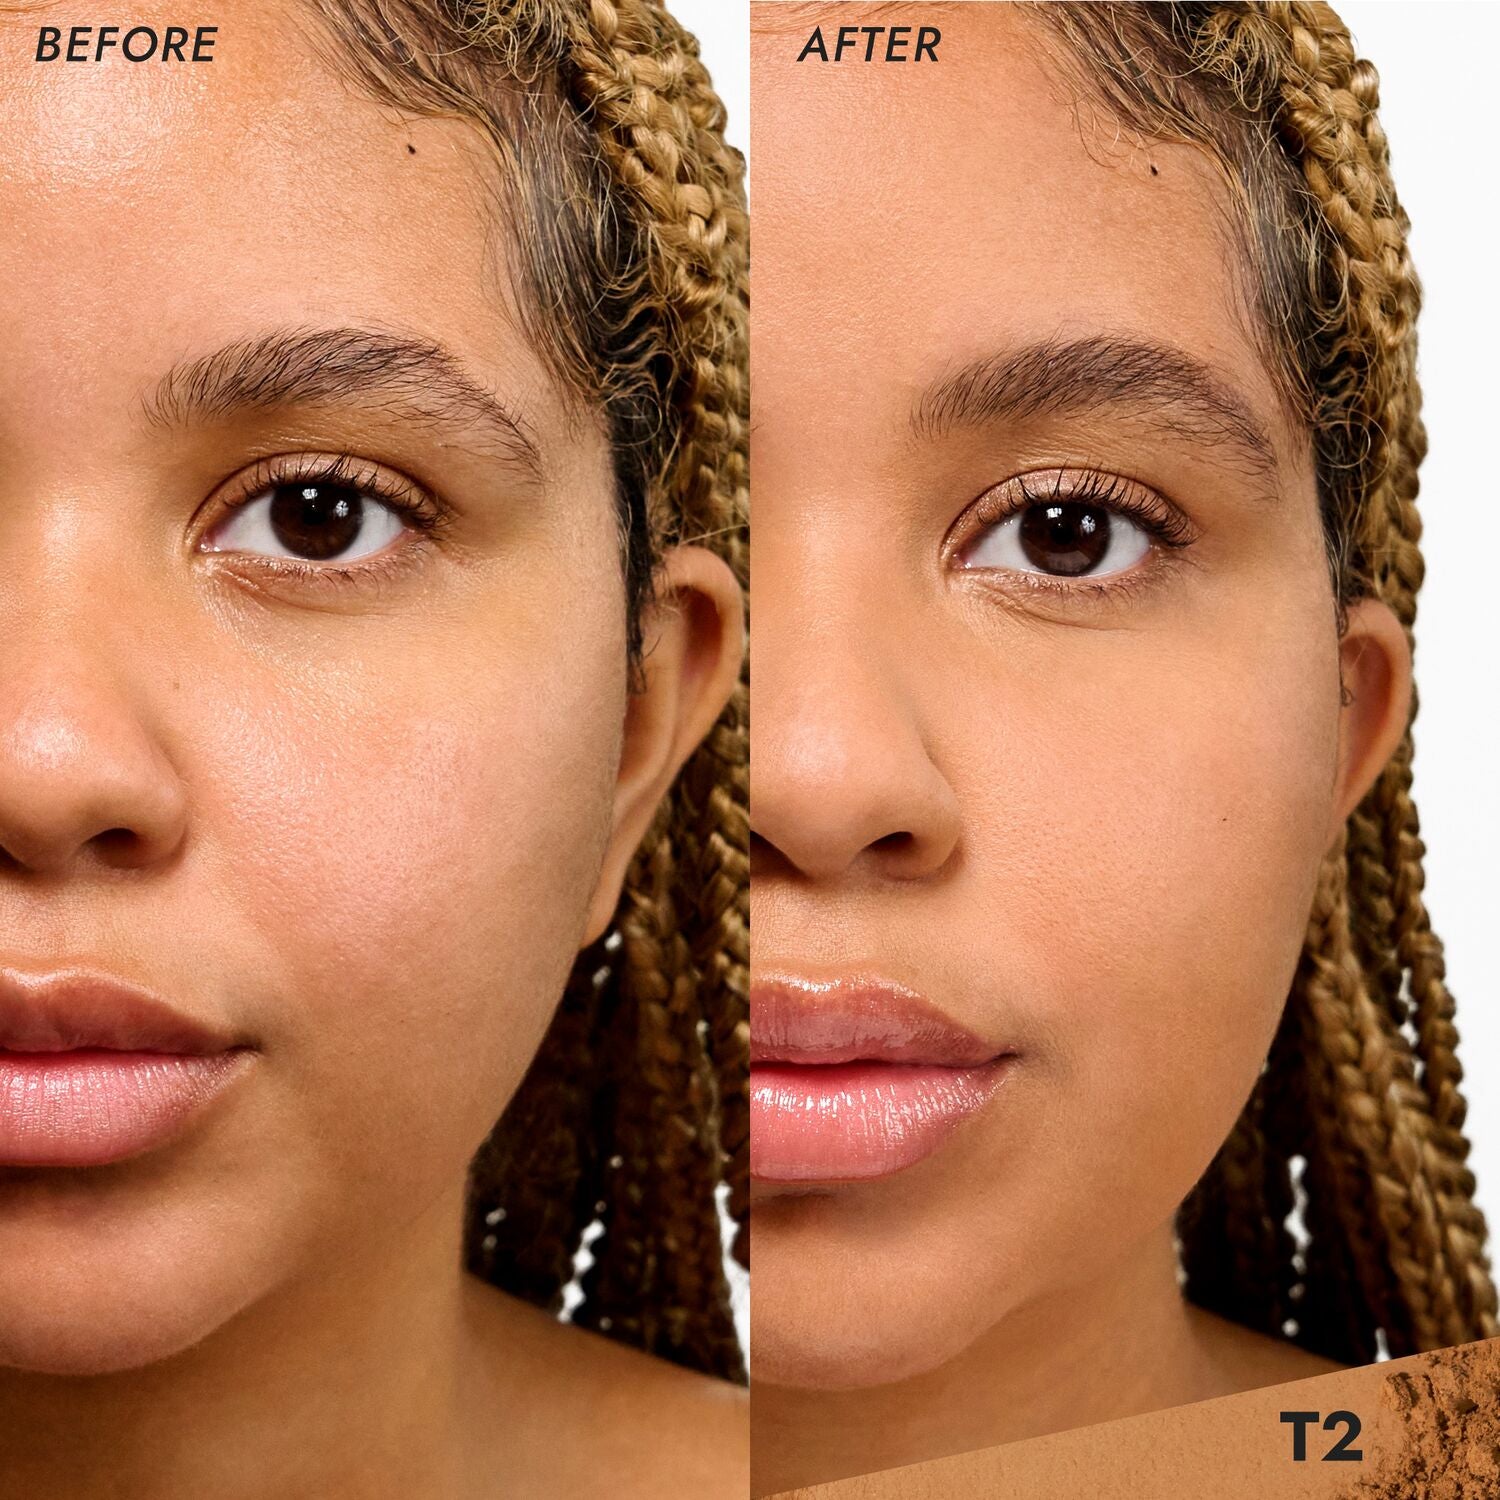 Coverfx Pressed Mineral Foundation model before and after image in shade  T2